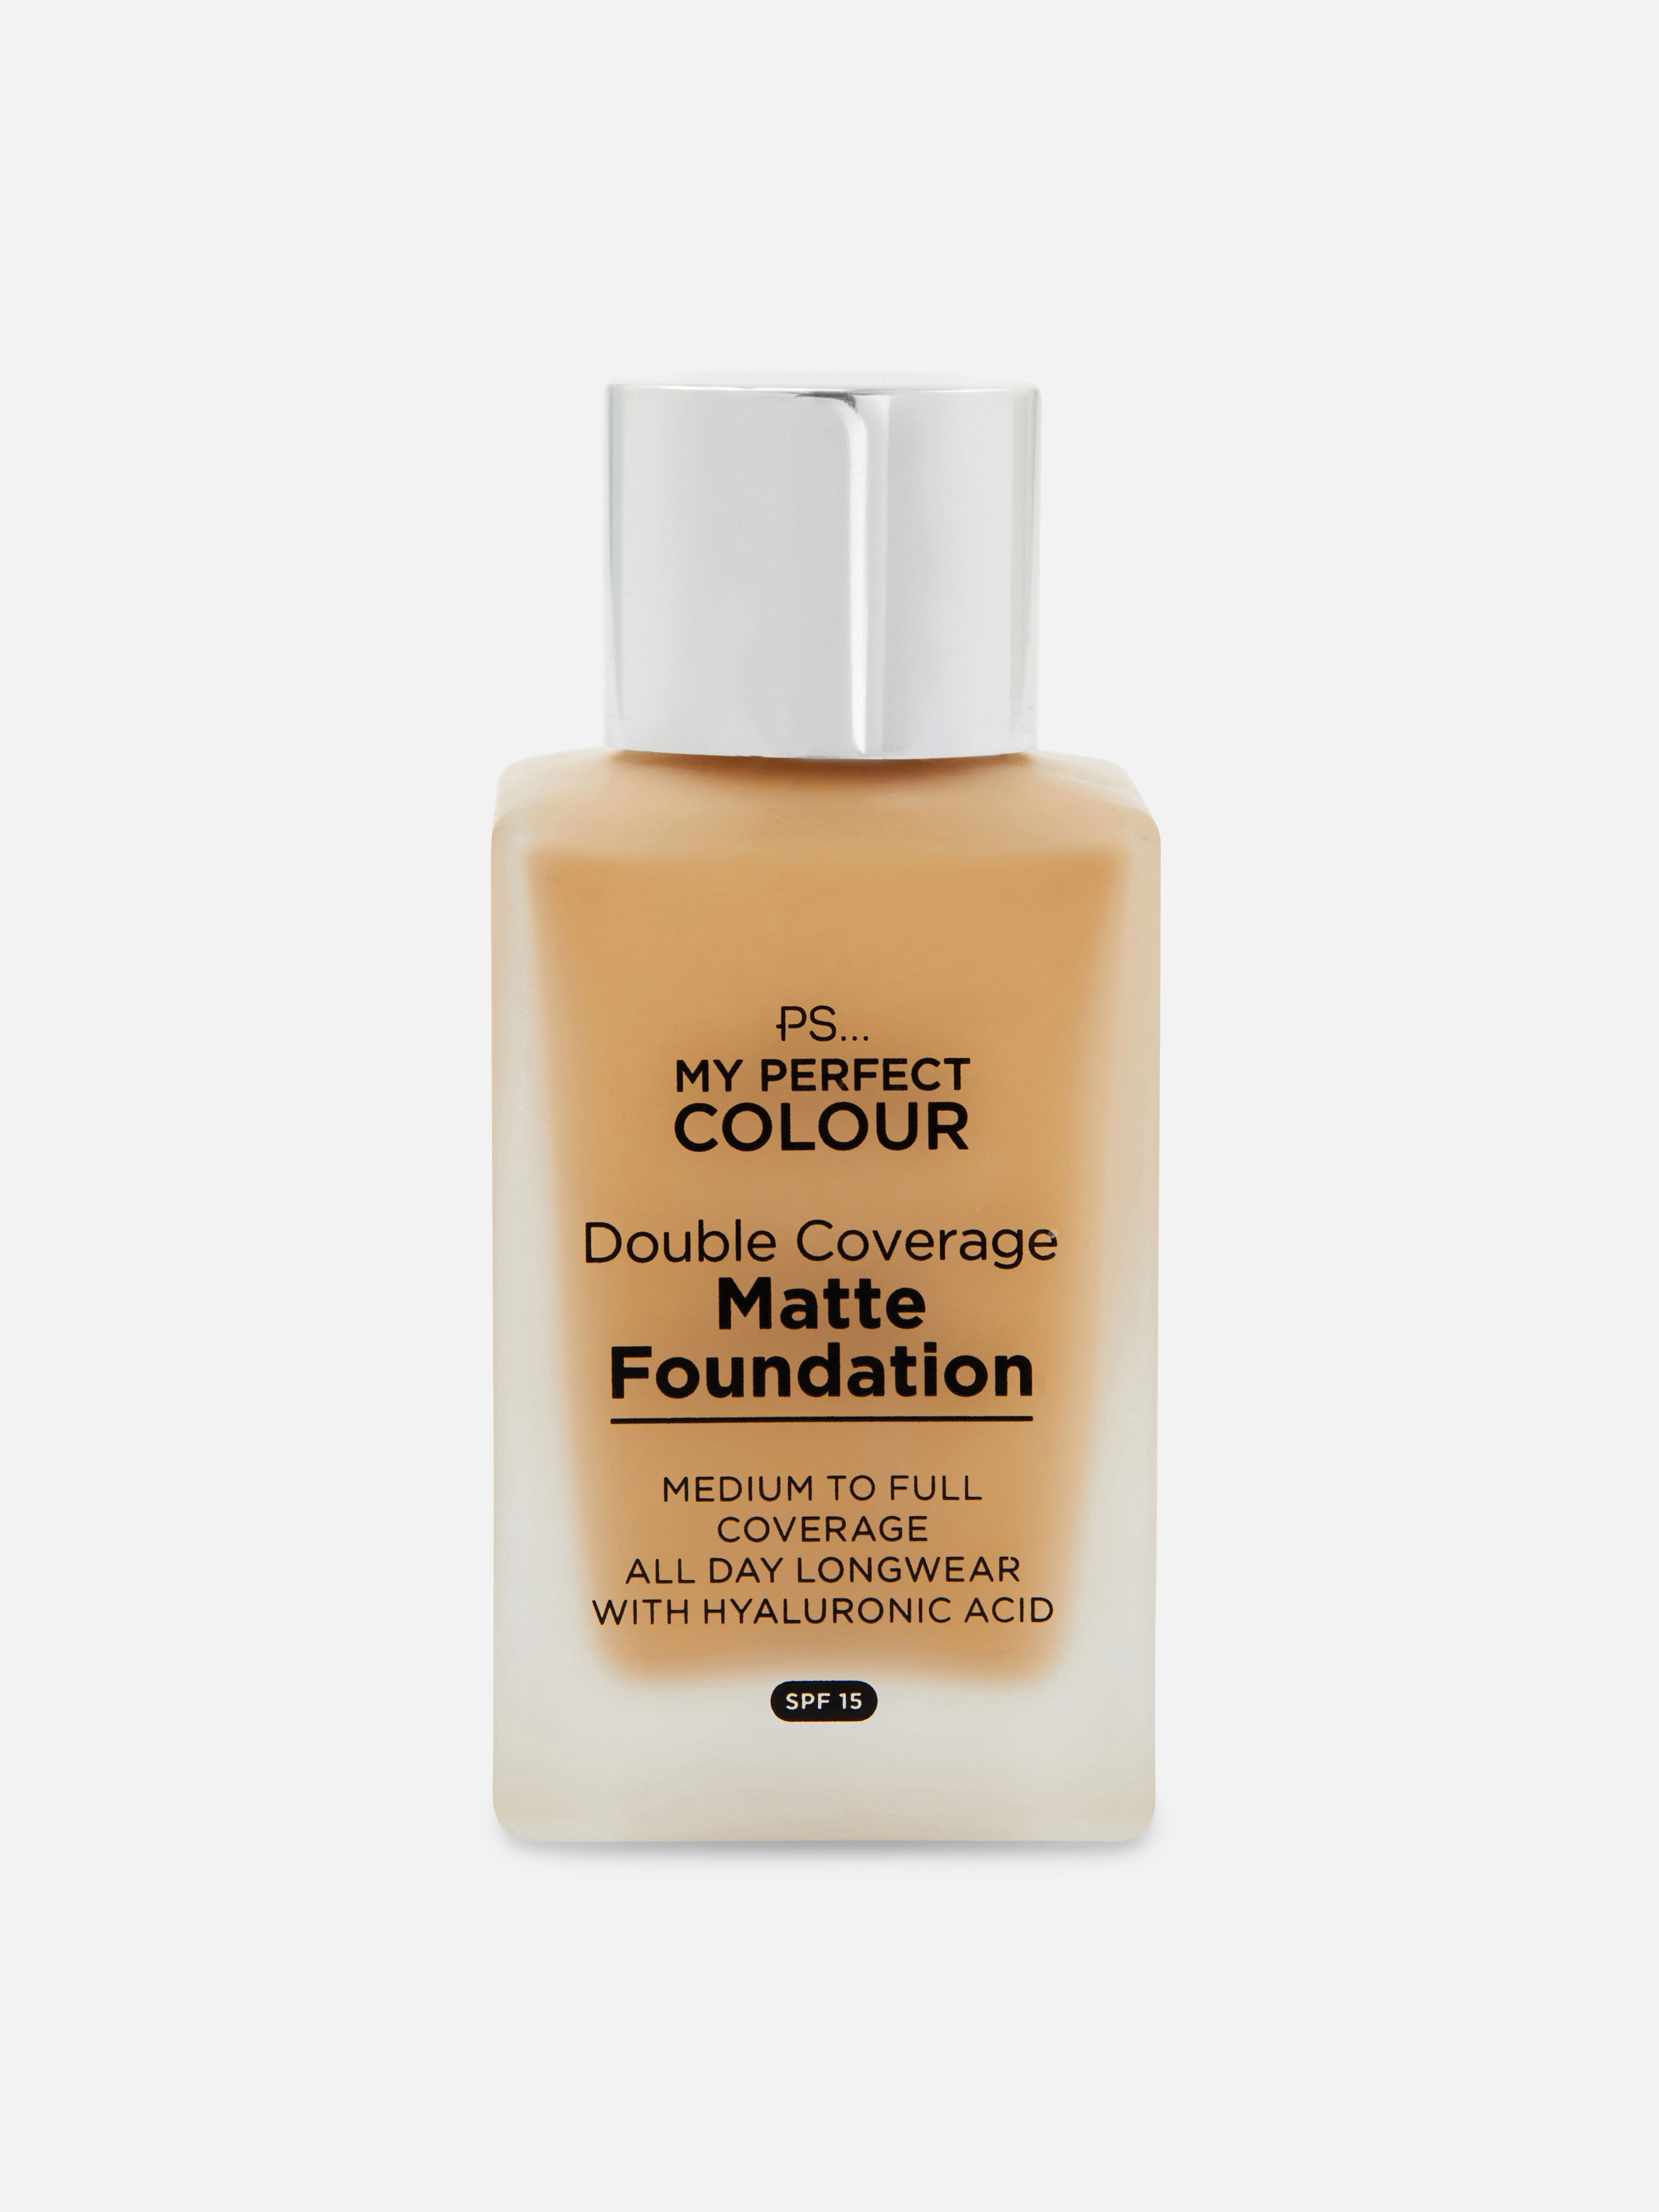 PS… My Perfect Colour Double Coverage Matte Foundation Nude